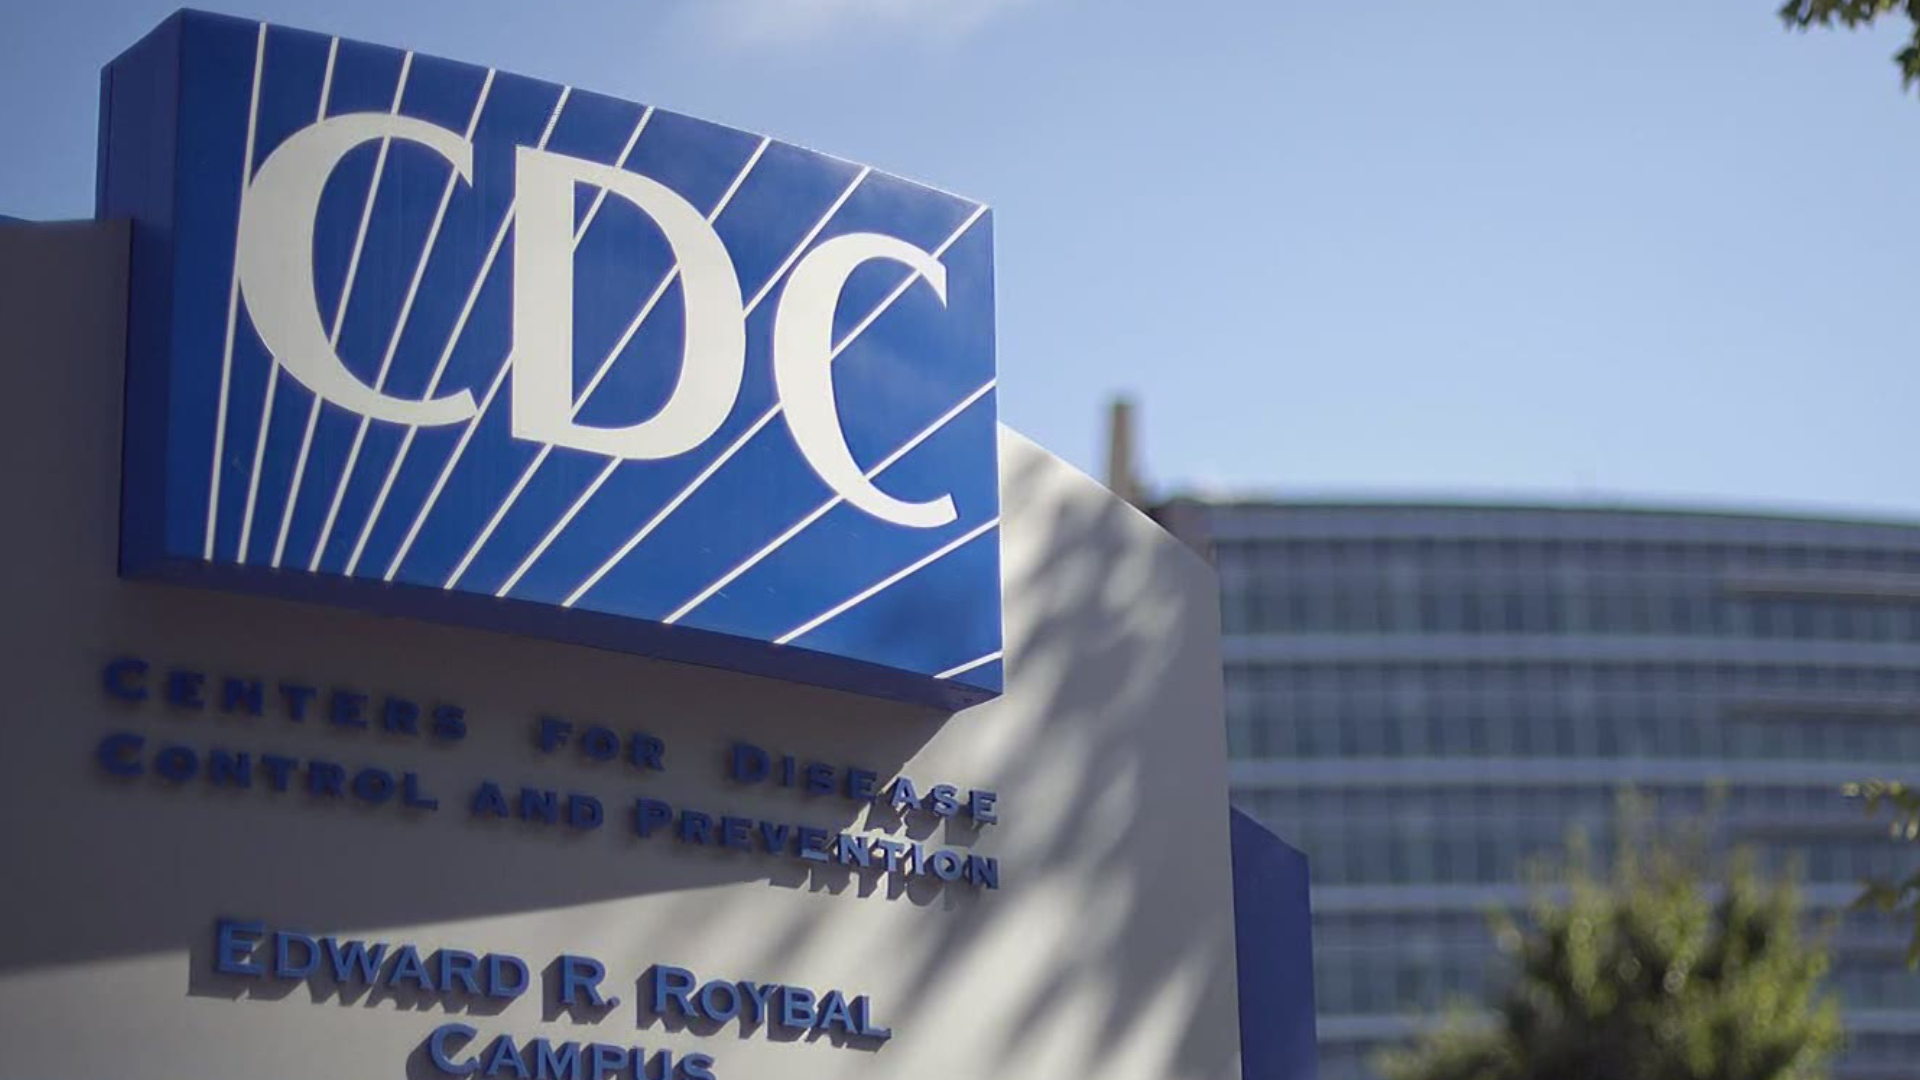 The CDC has declared racism a public health threat and shared initiative to tackle disparities to improve health equity and build a healthier nation.